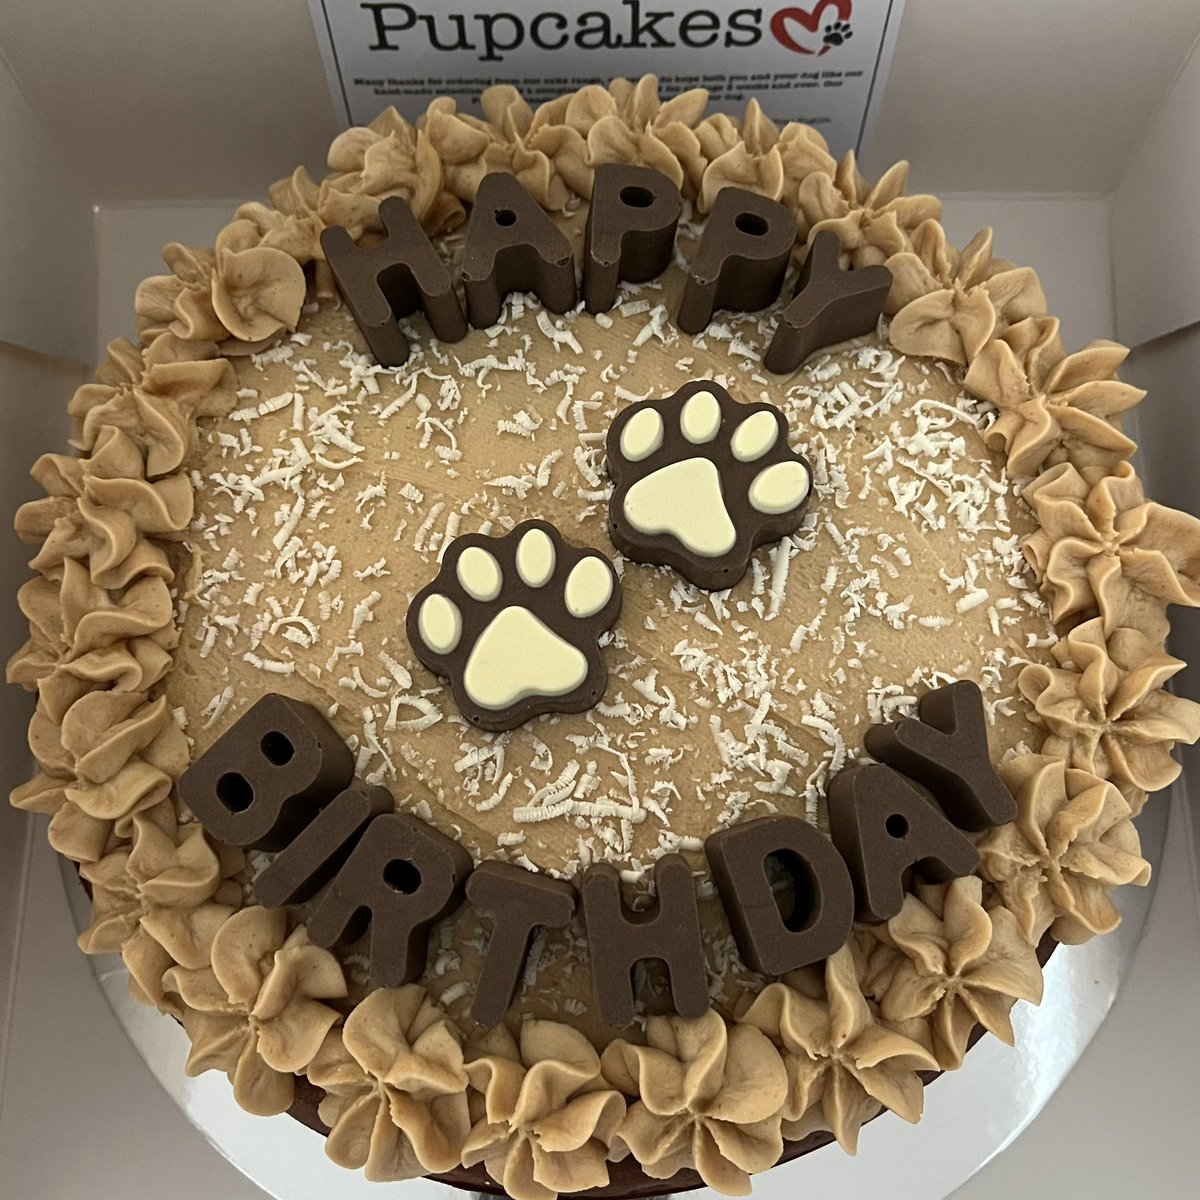 Here is our first cake of 2023! This is our 8” Happy Birthday Cake and can be ordered from our website at pupcakes.org.uk ❤️🐾#pupcakes #dogbakery #dogcake #dogtreatsuk #supportlocal #supportsmallbusinesses